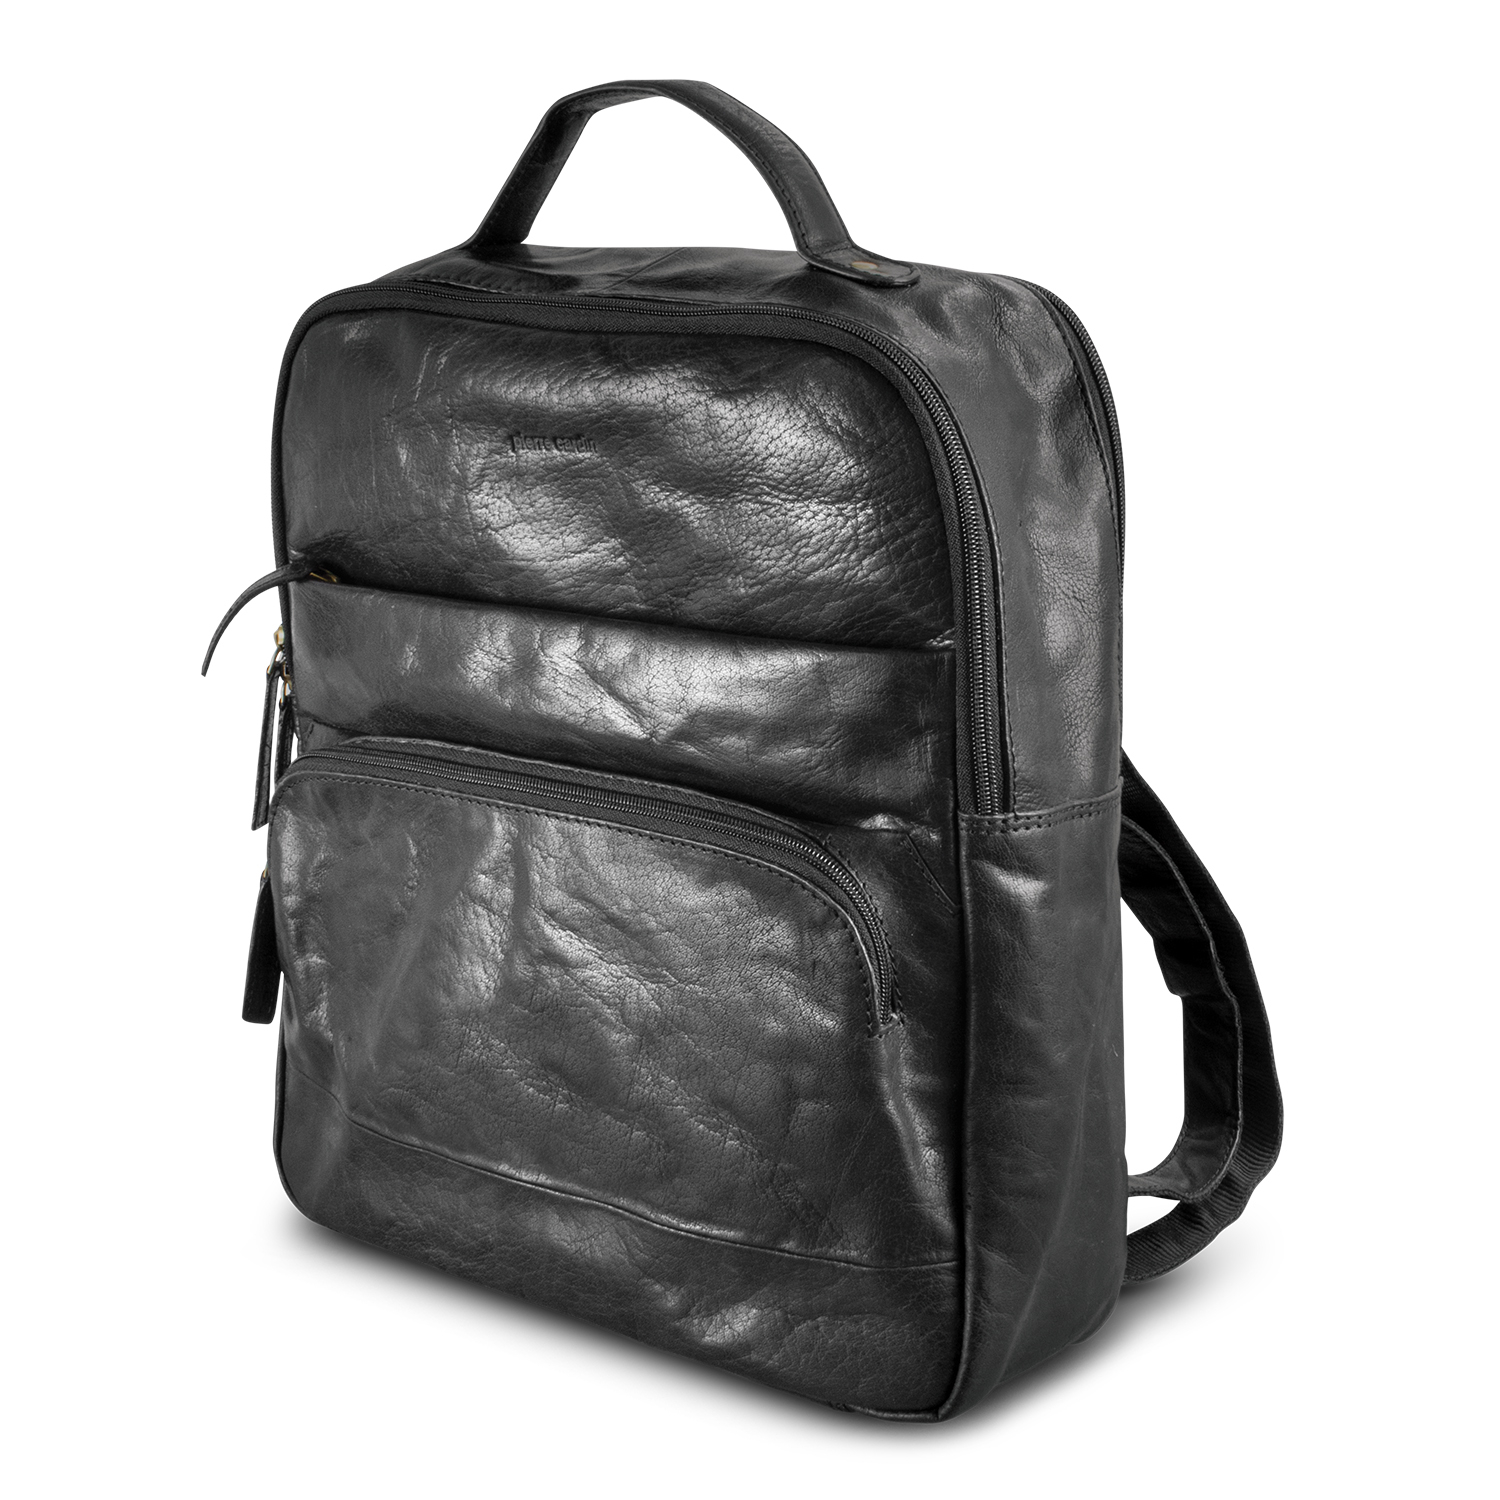 TRENDS | Pierre Cardin Leather Backpack